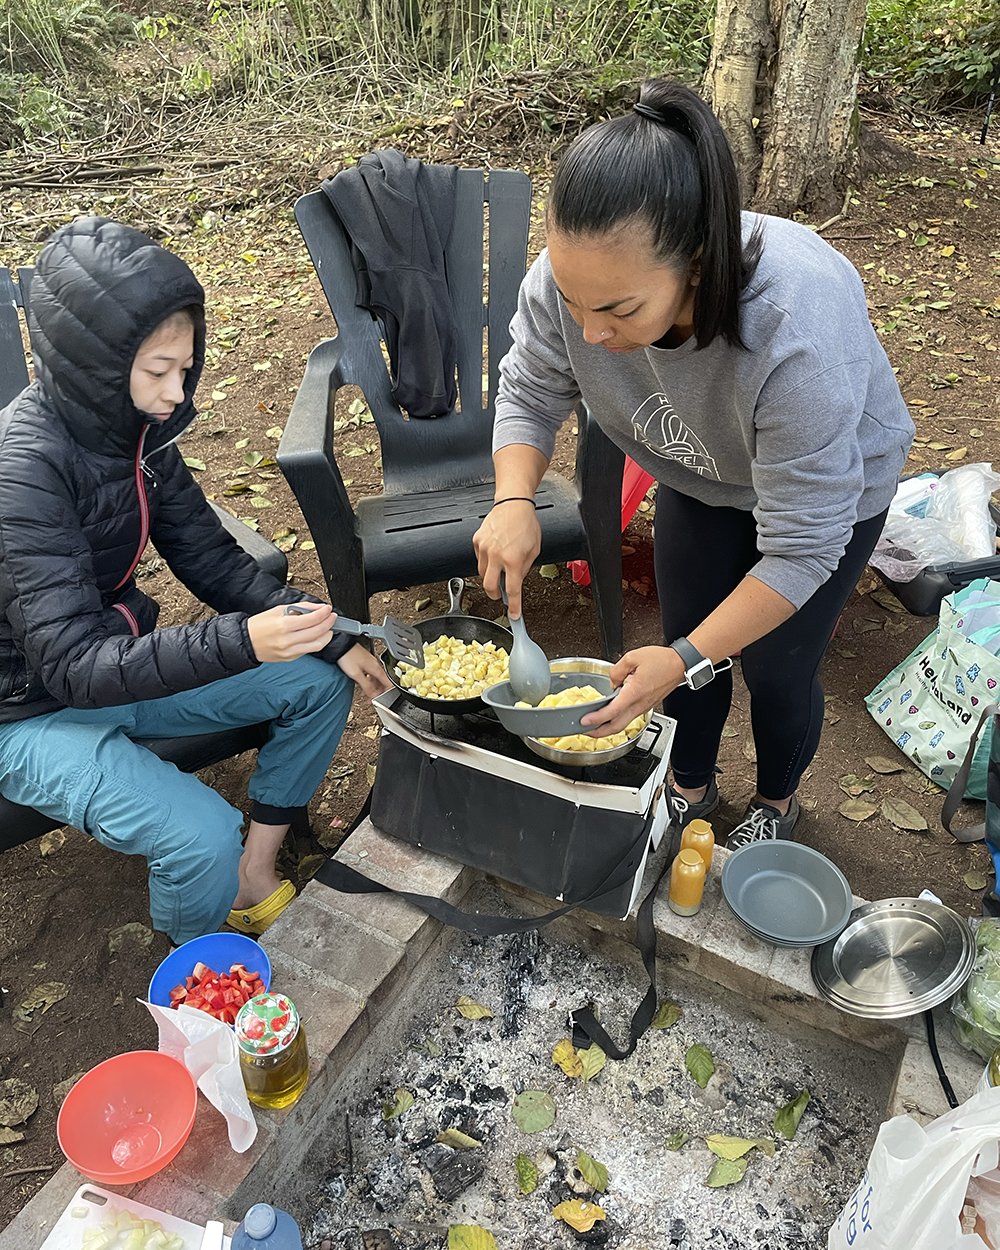  Mica and I cooking breakfast at camp.  